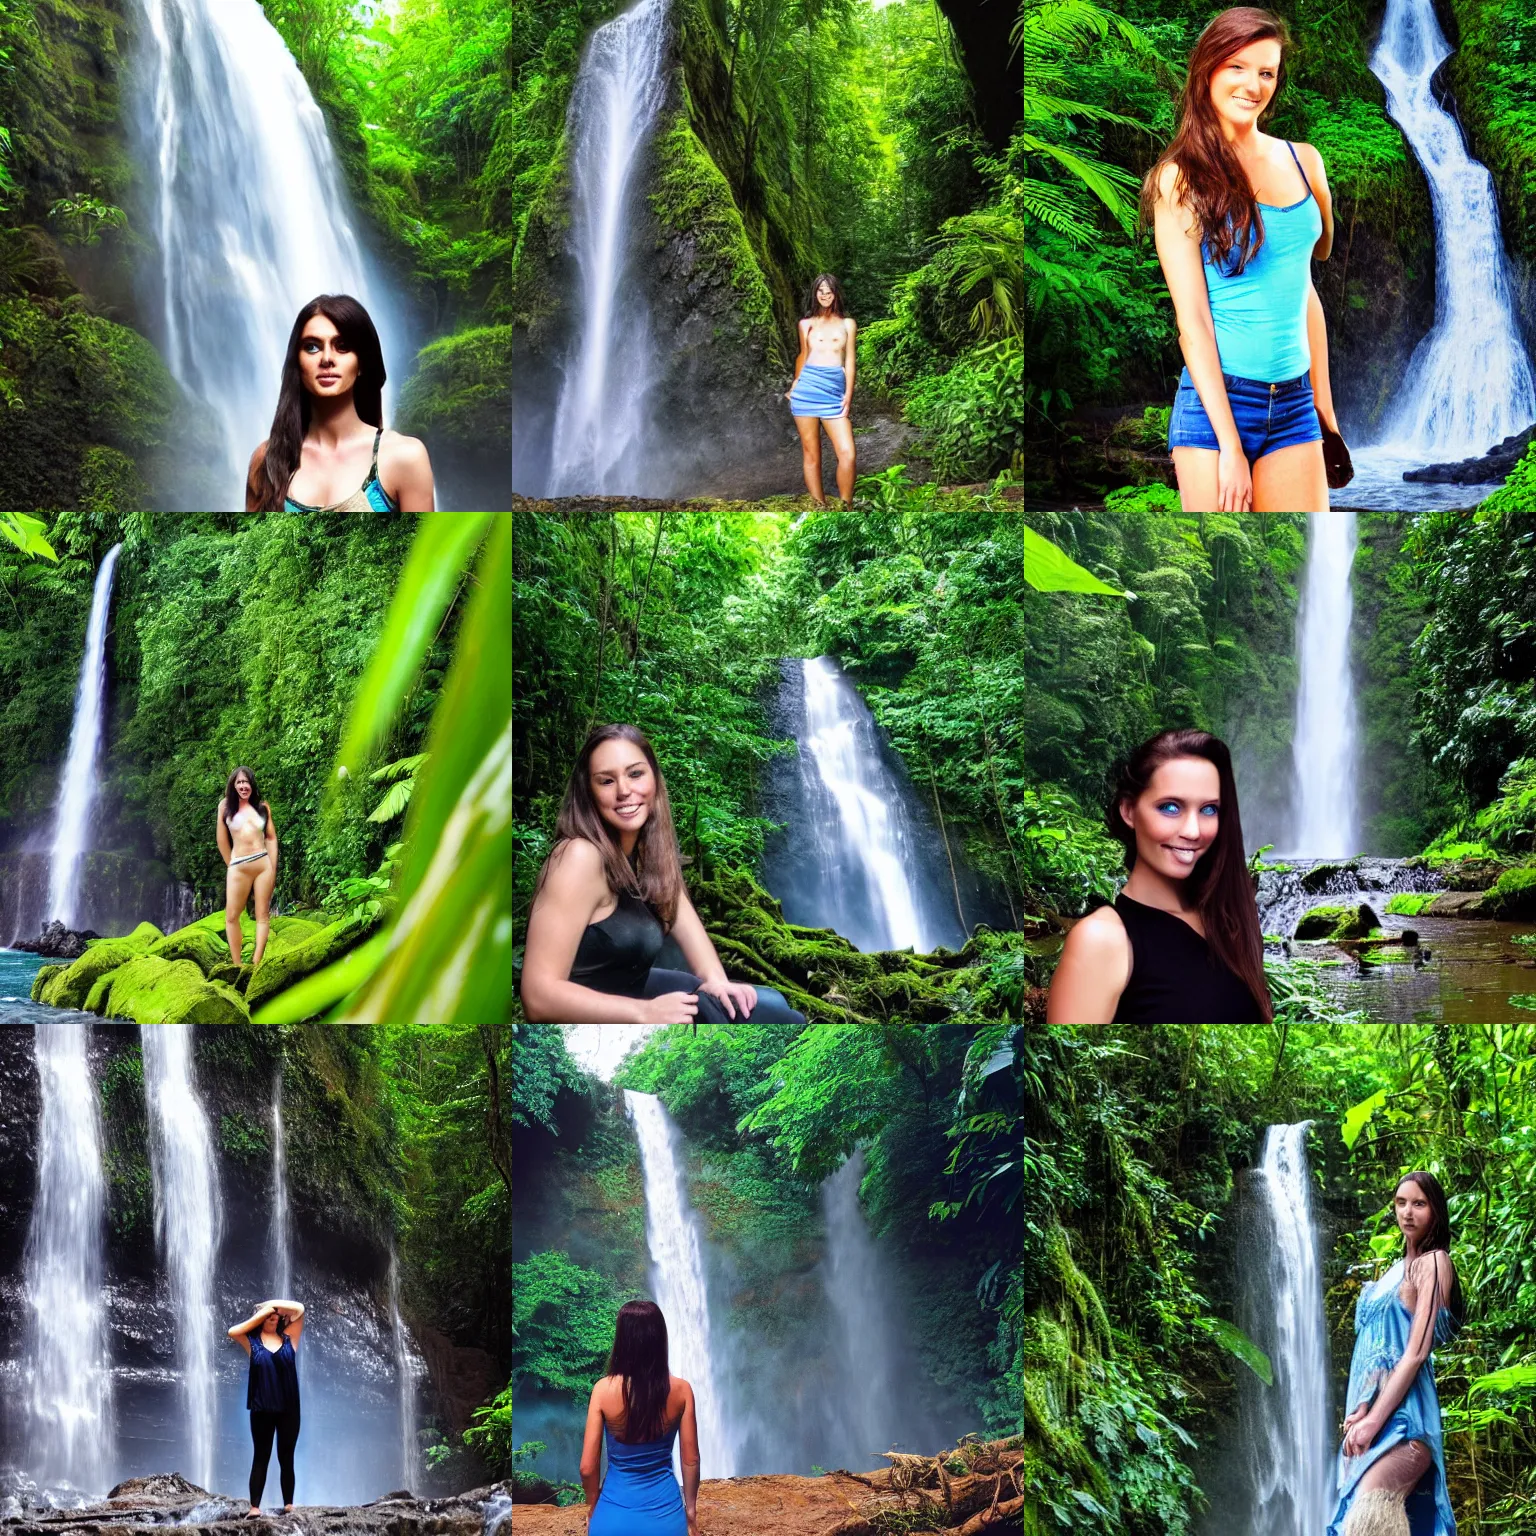 Prompt: A beautiful blue-eyed brunette woman, amazon forest and waterfall in the background